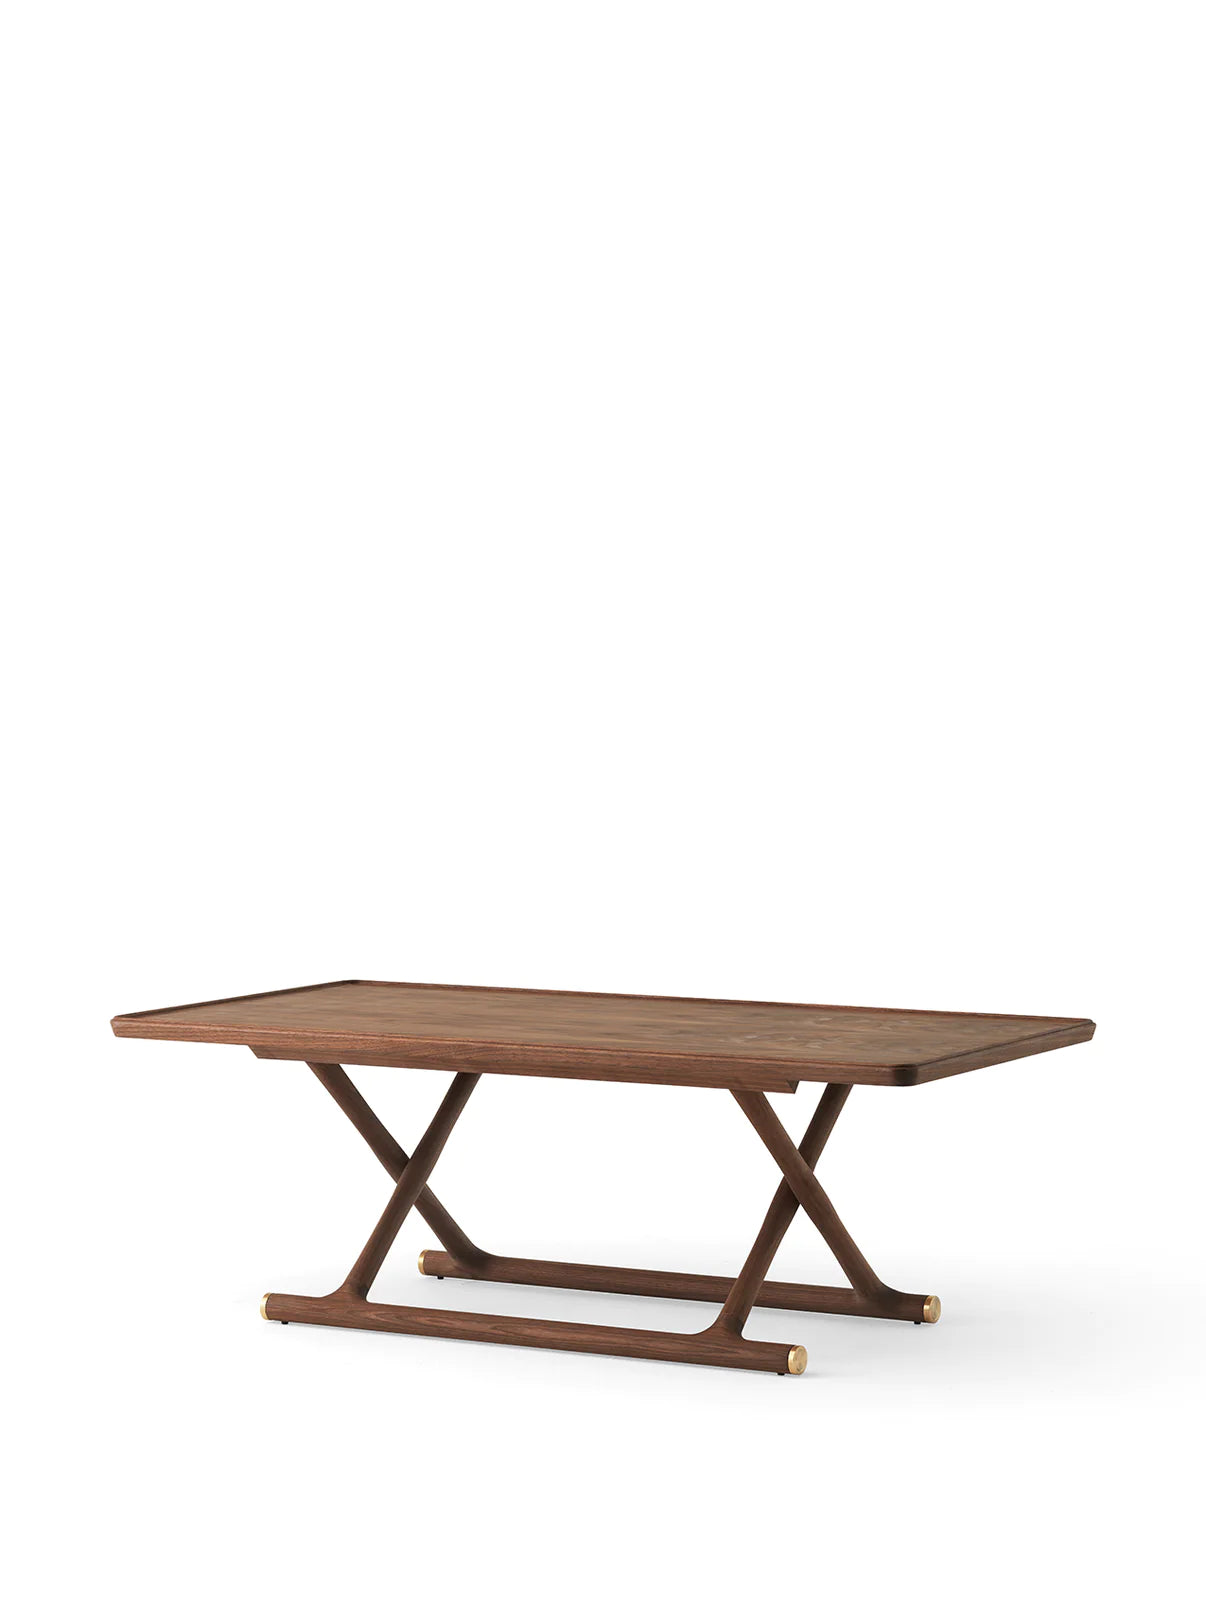 Audo JAGER Foldable Lounge Table